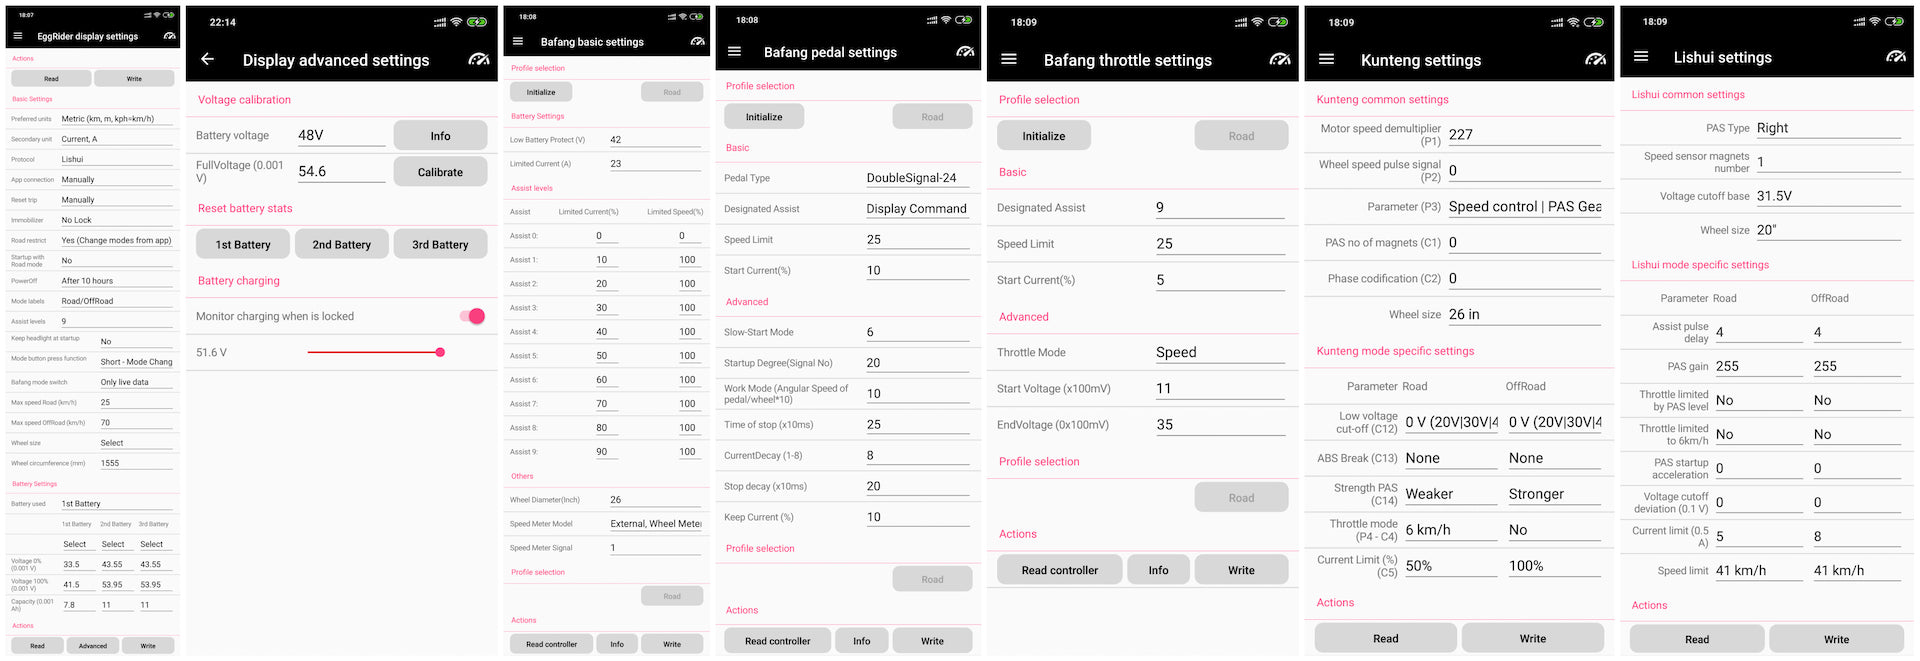 EggRider settings pages screenshots